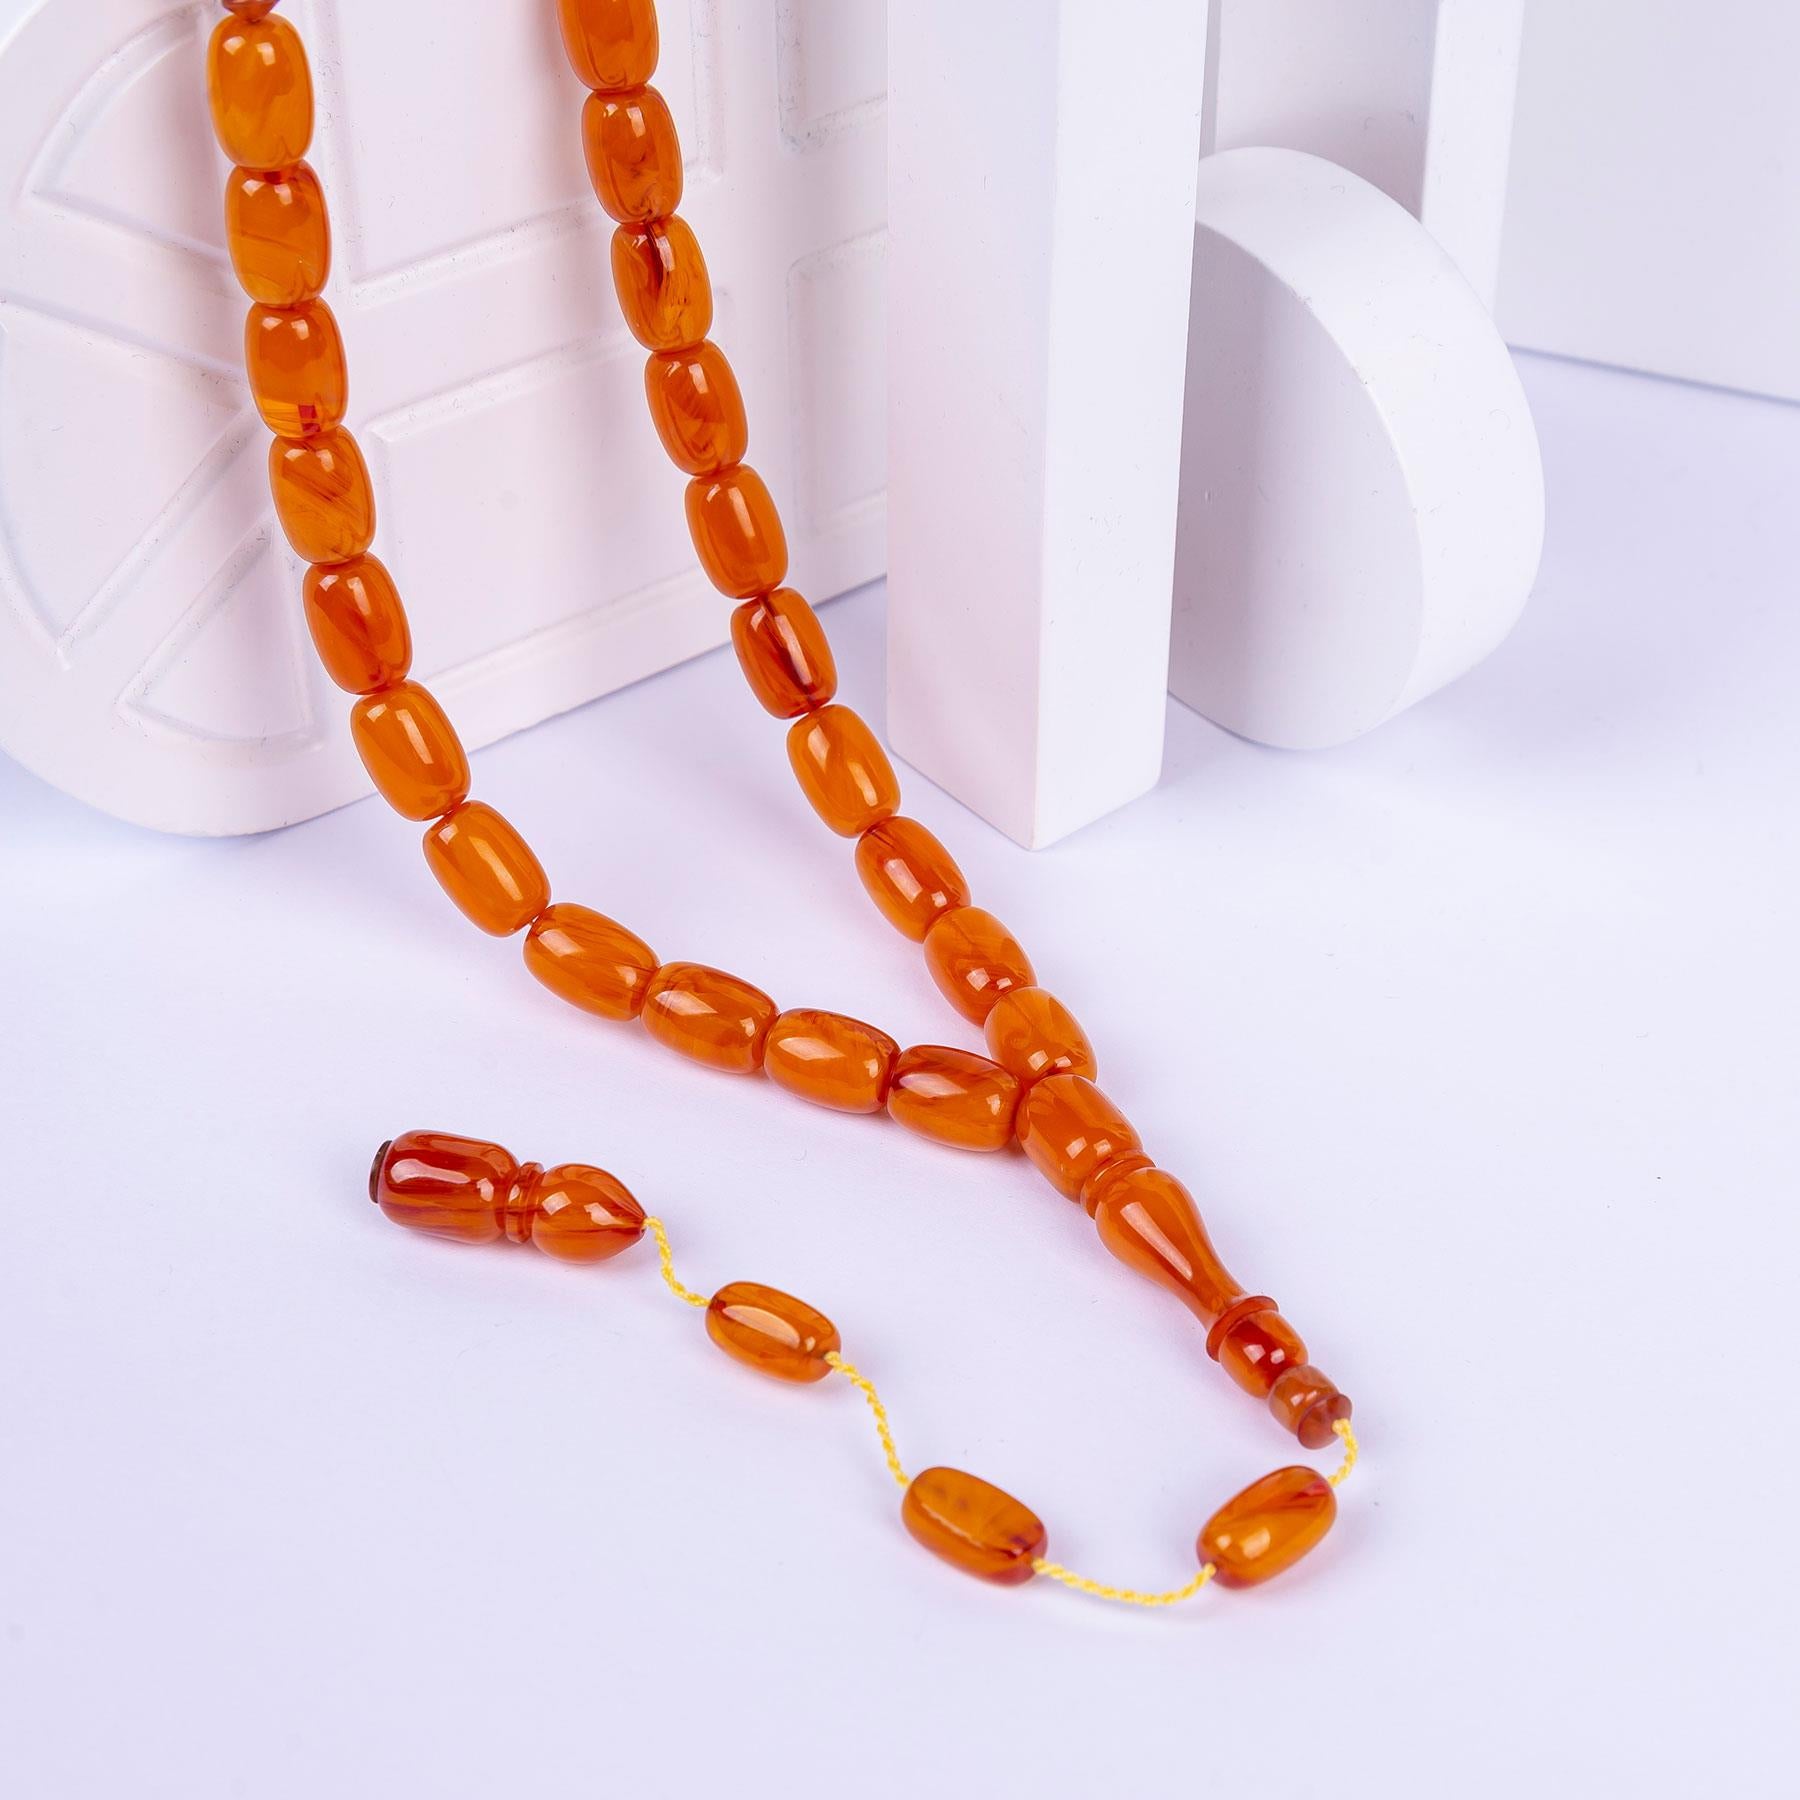 Systematic Capsule Cut and Pressed Amber Prayer Beads 3